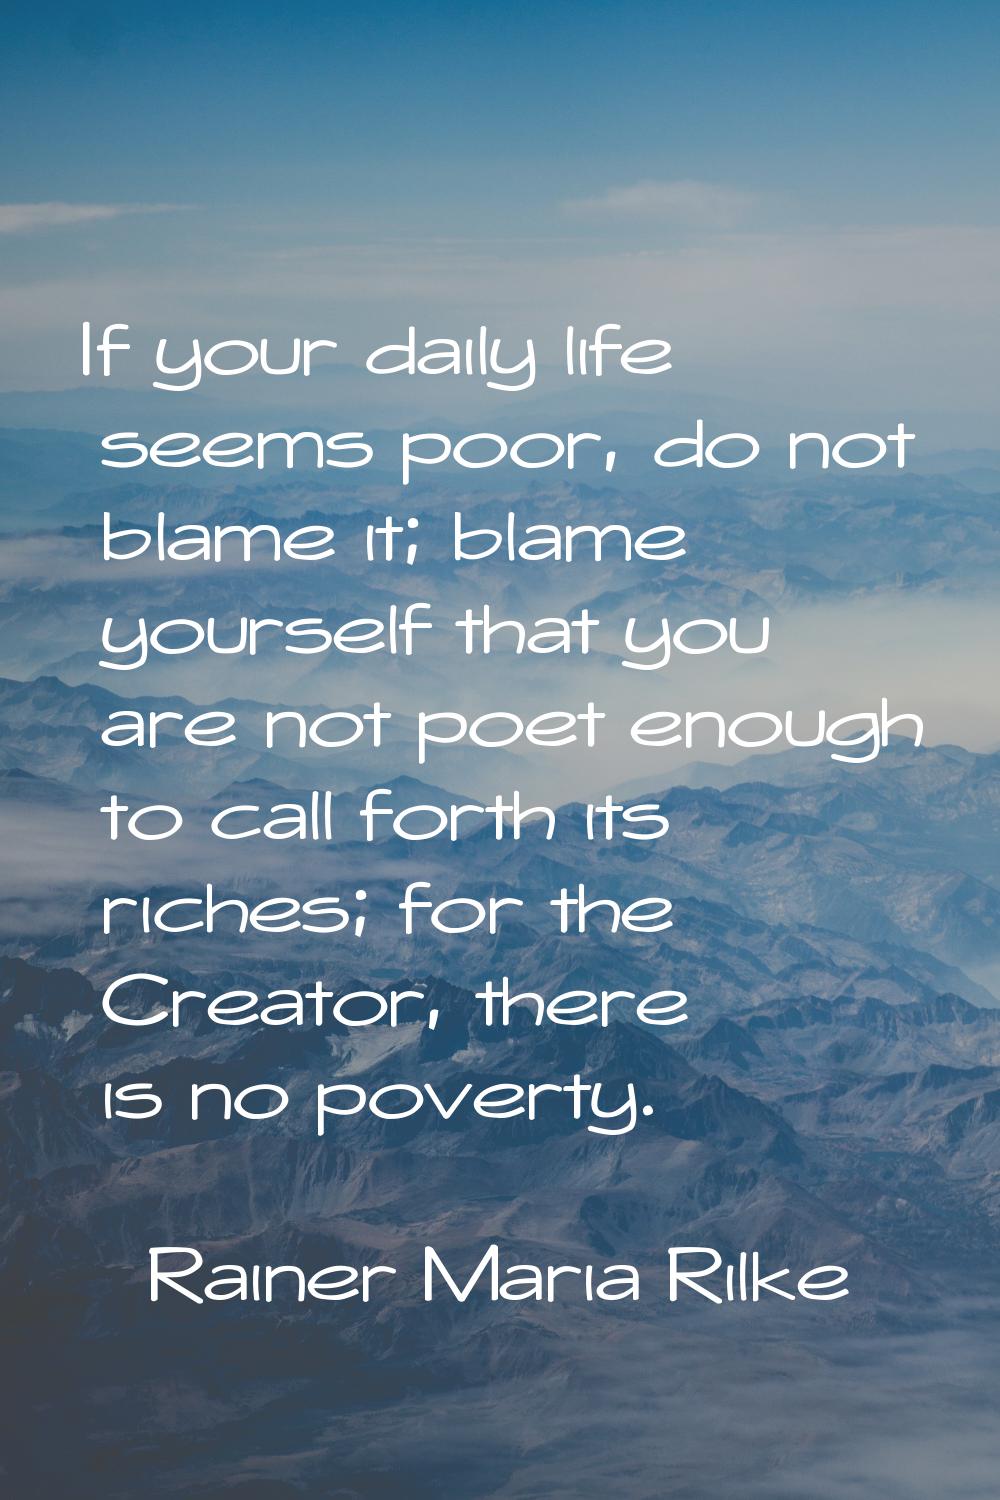 If your daily life seems poor, do not blame it; blame yourself that you are not poet enough to call